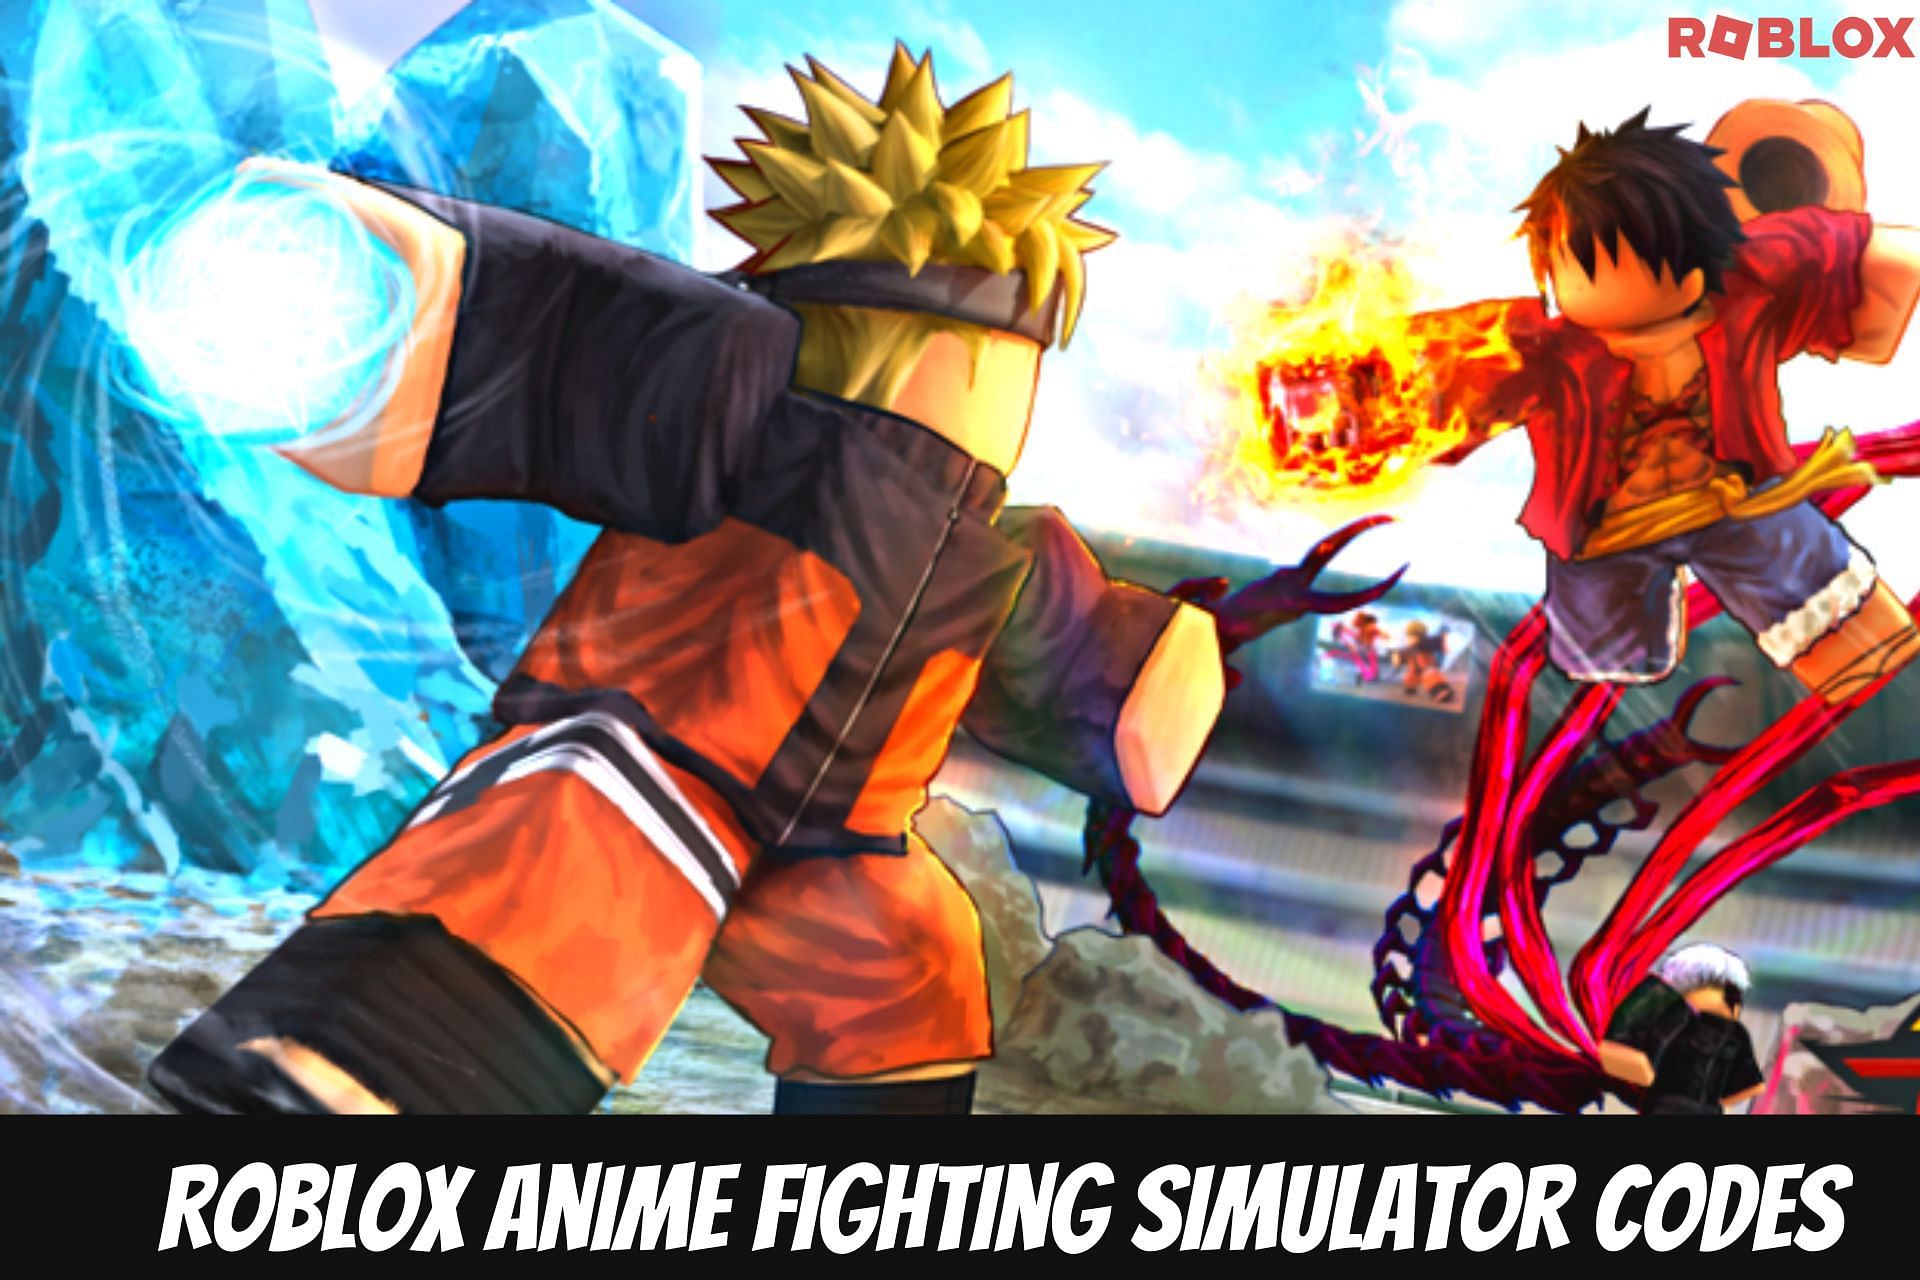 Quirks, Anime Fighting Simulator Wiki